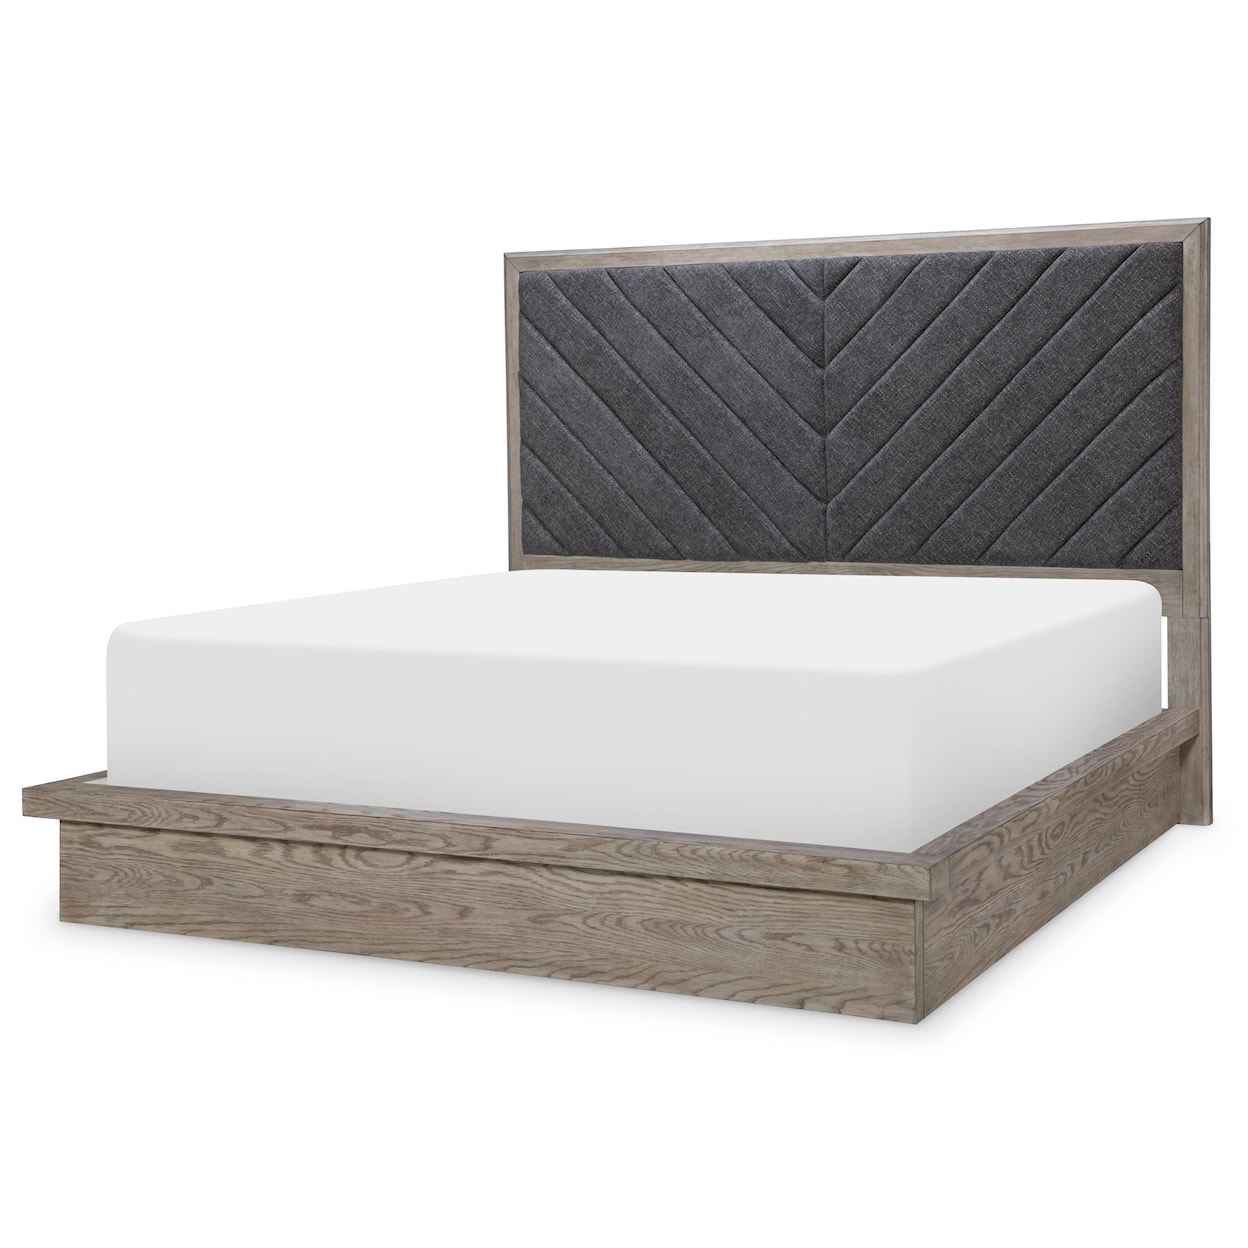 Legacy Classic Halifax Upholstered Queen Bed